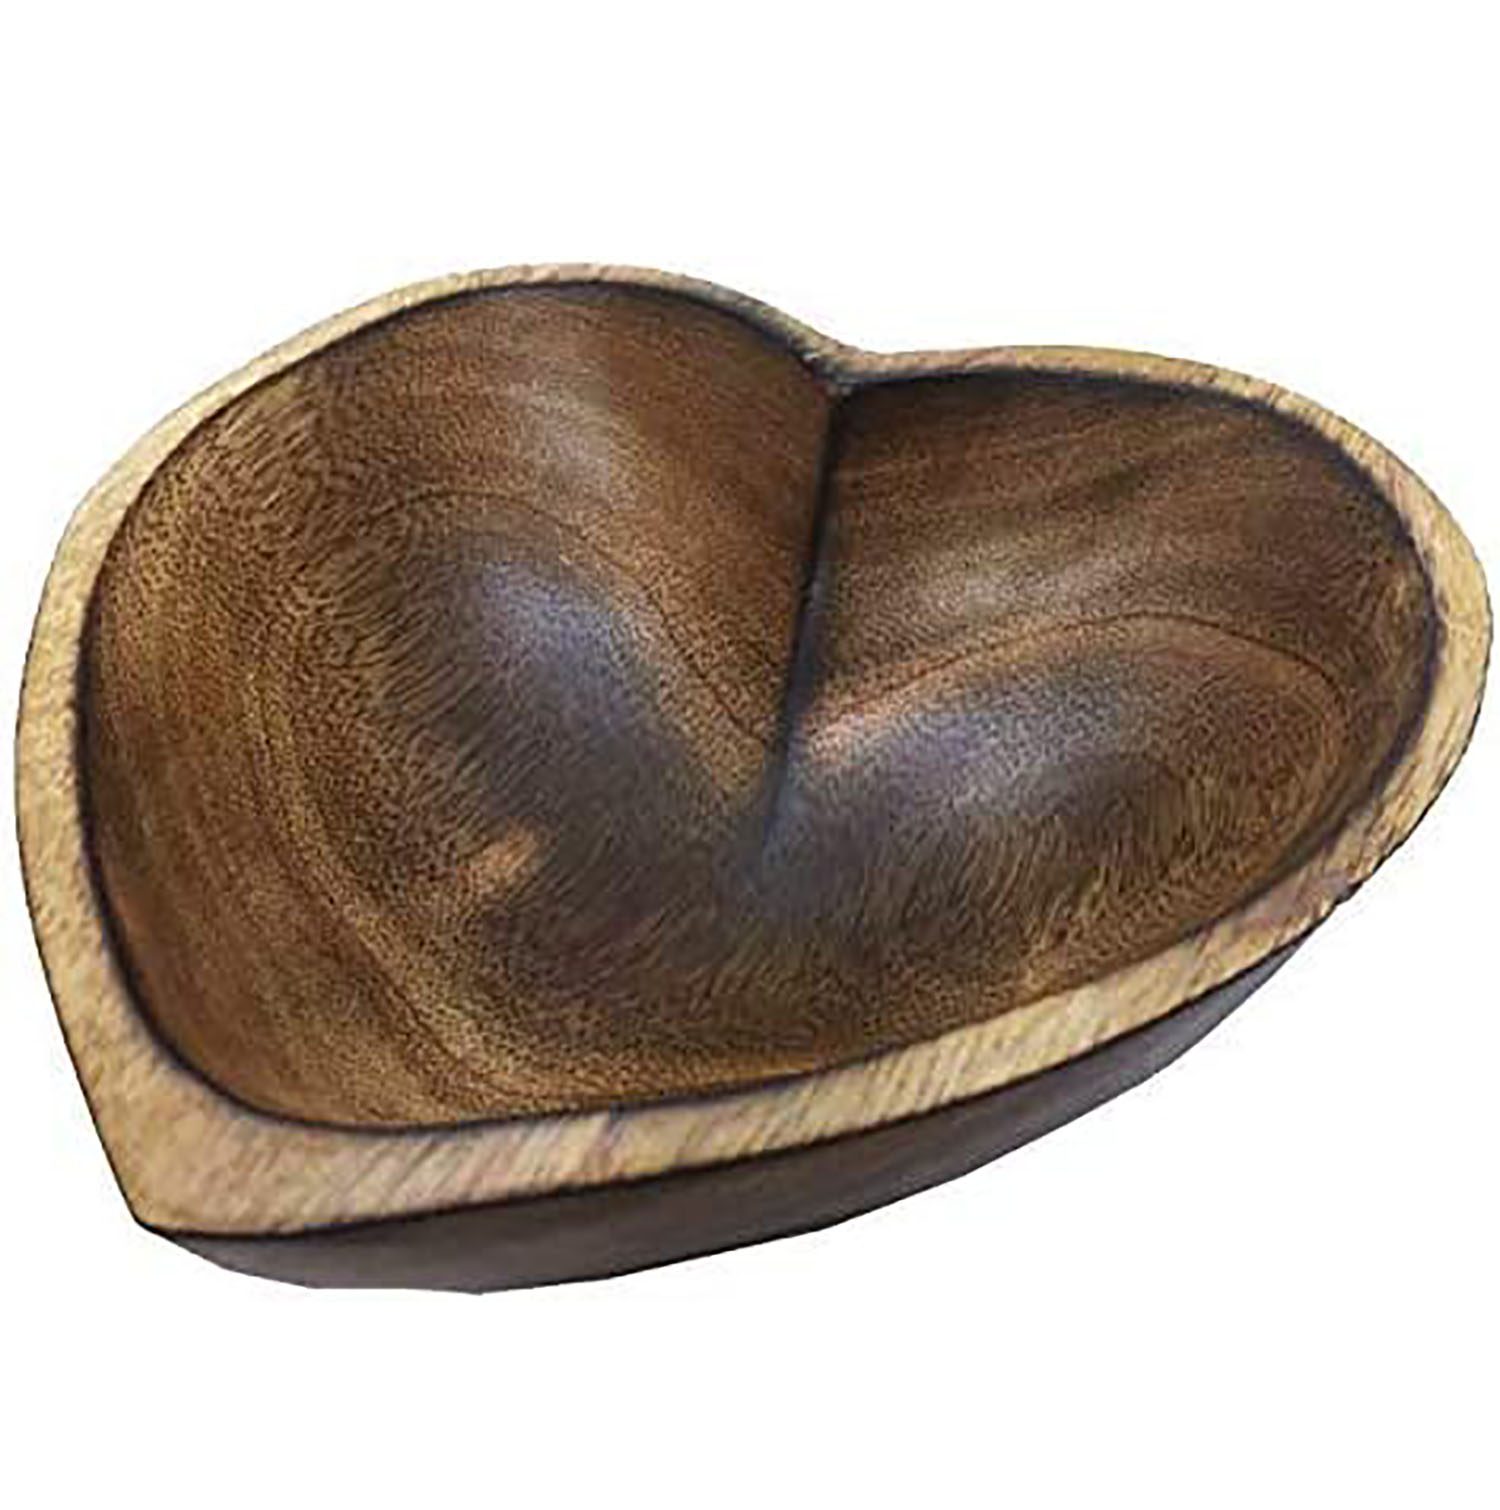 Heart Shaped Bowl – Small Functional and Collectible Bowl – Handcrafted Wooden Bowl